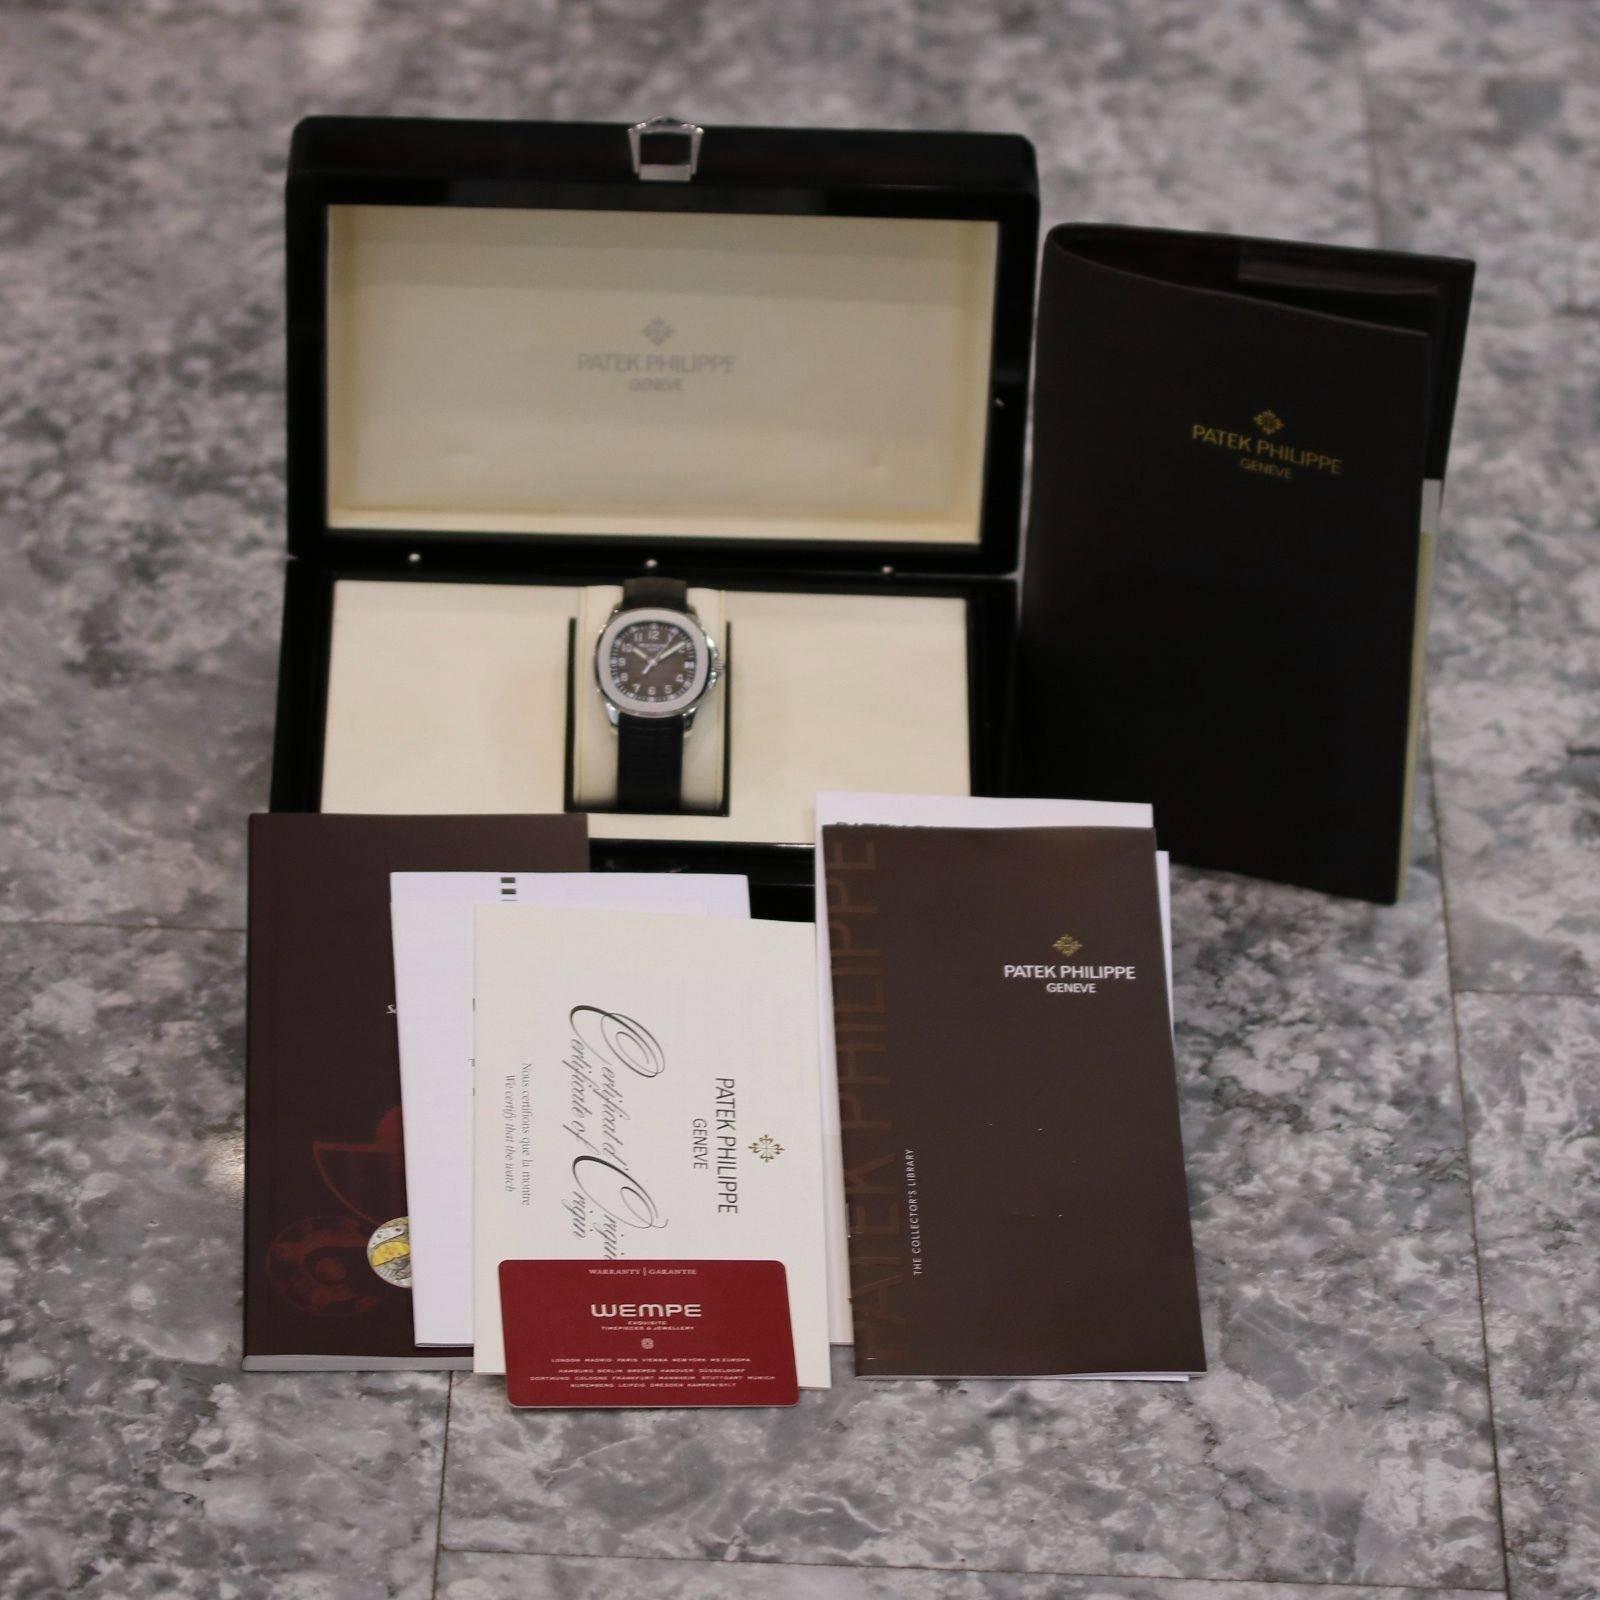 Patek Philippe Stainless Steel Aquanaut Automatic Wristwatch Ref 5165a-001 1